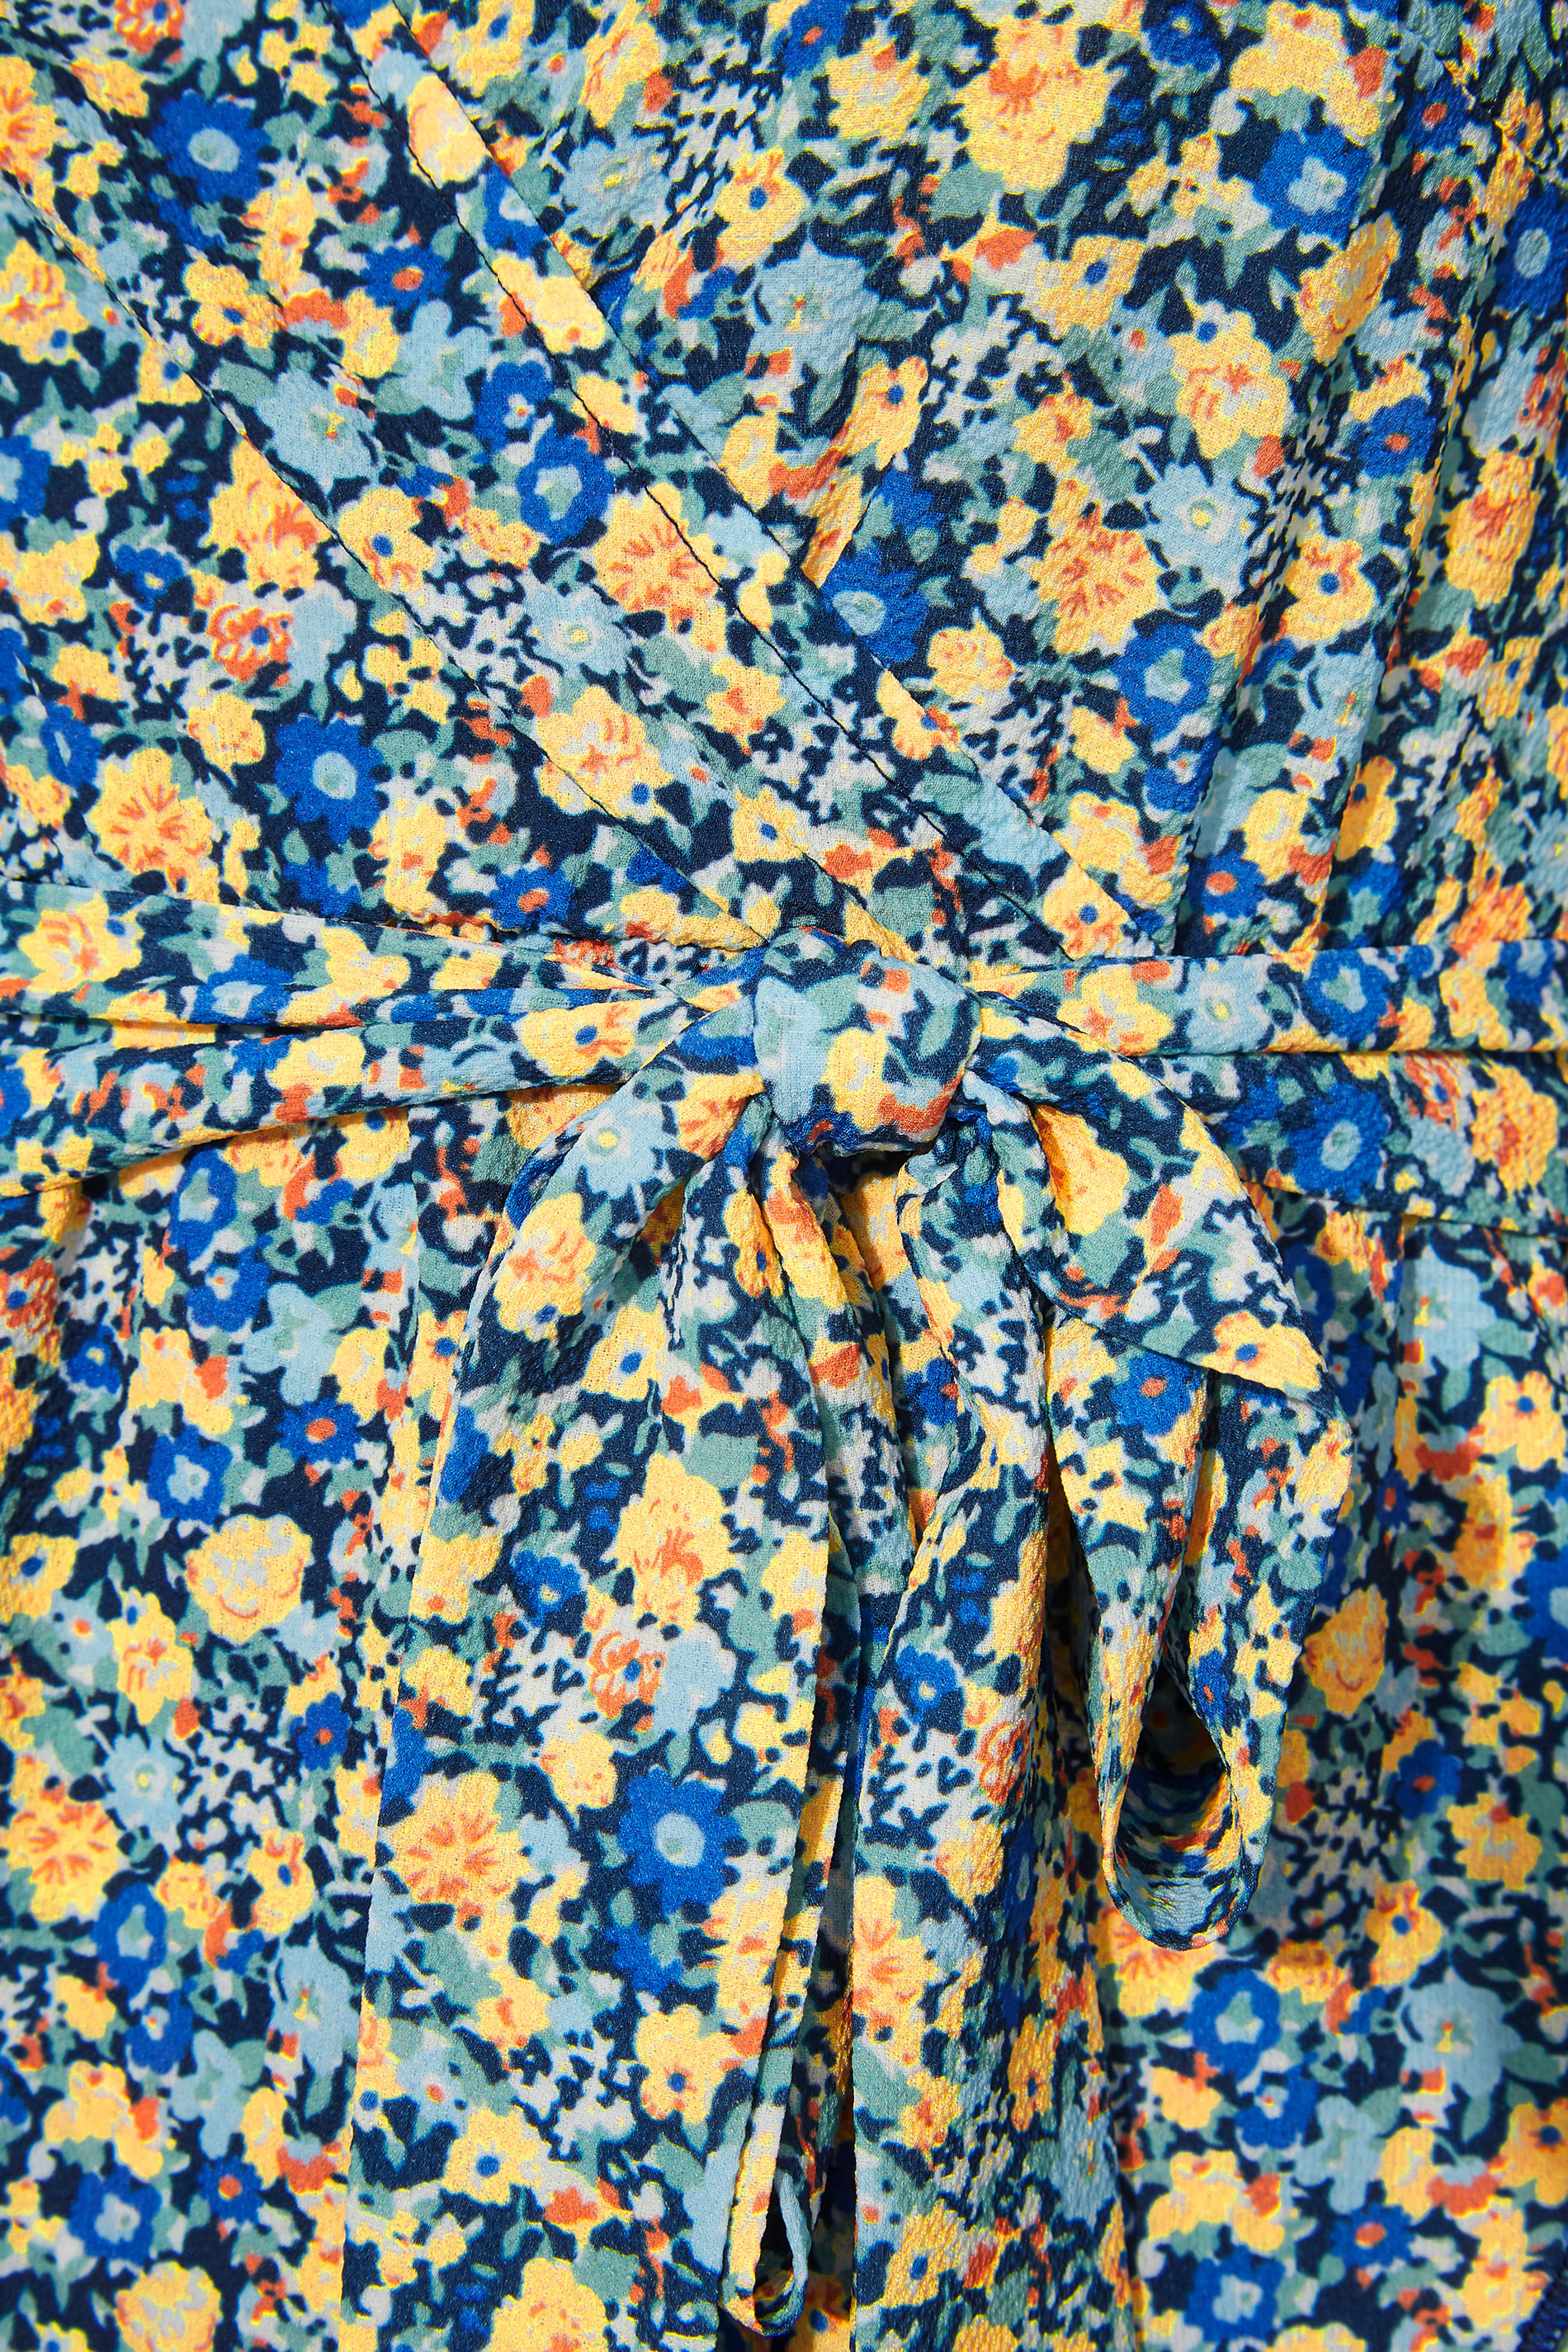 Robes Grande Taille Grande taille  Robes Portefeuilles | YOURS LONDON - Robe Bleue Floral Cache-Coeur - BY00897